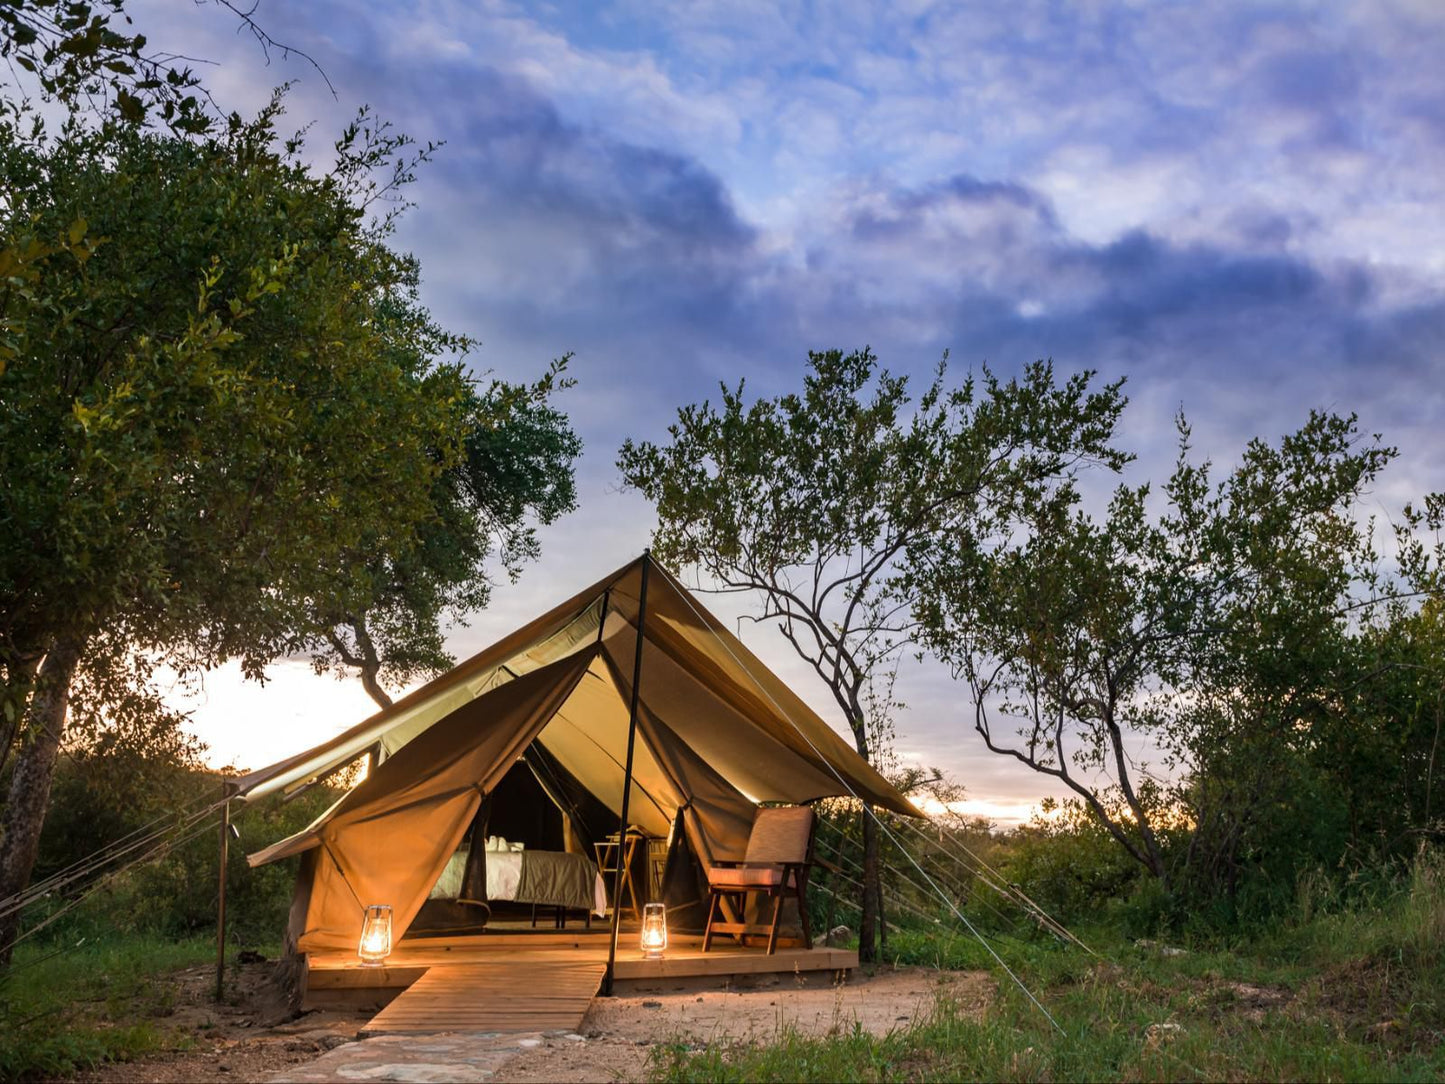 Bundox Explorer Camp Olifants Mpumalanga South Africa Complementary Colors, Tent, Architecture